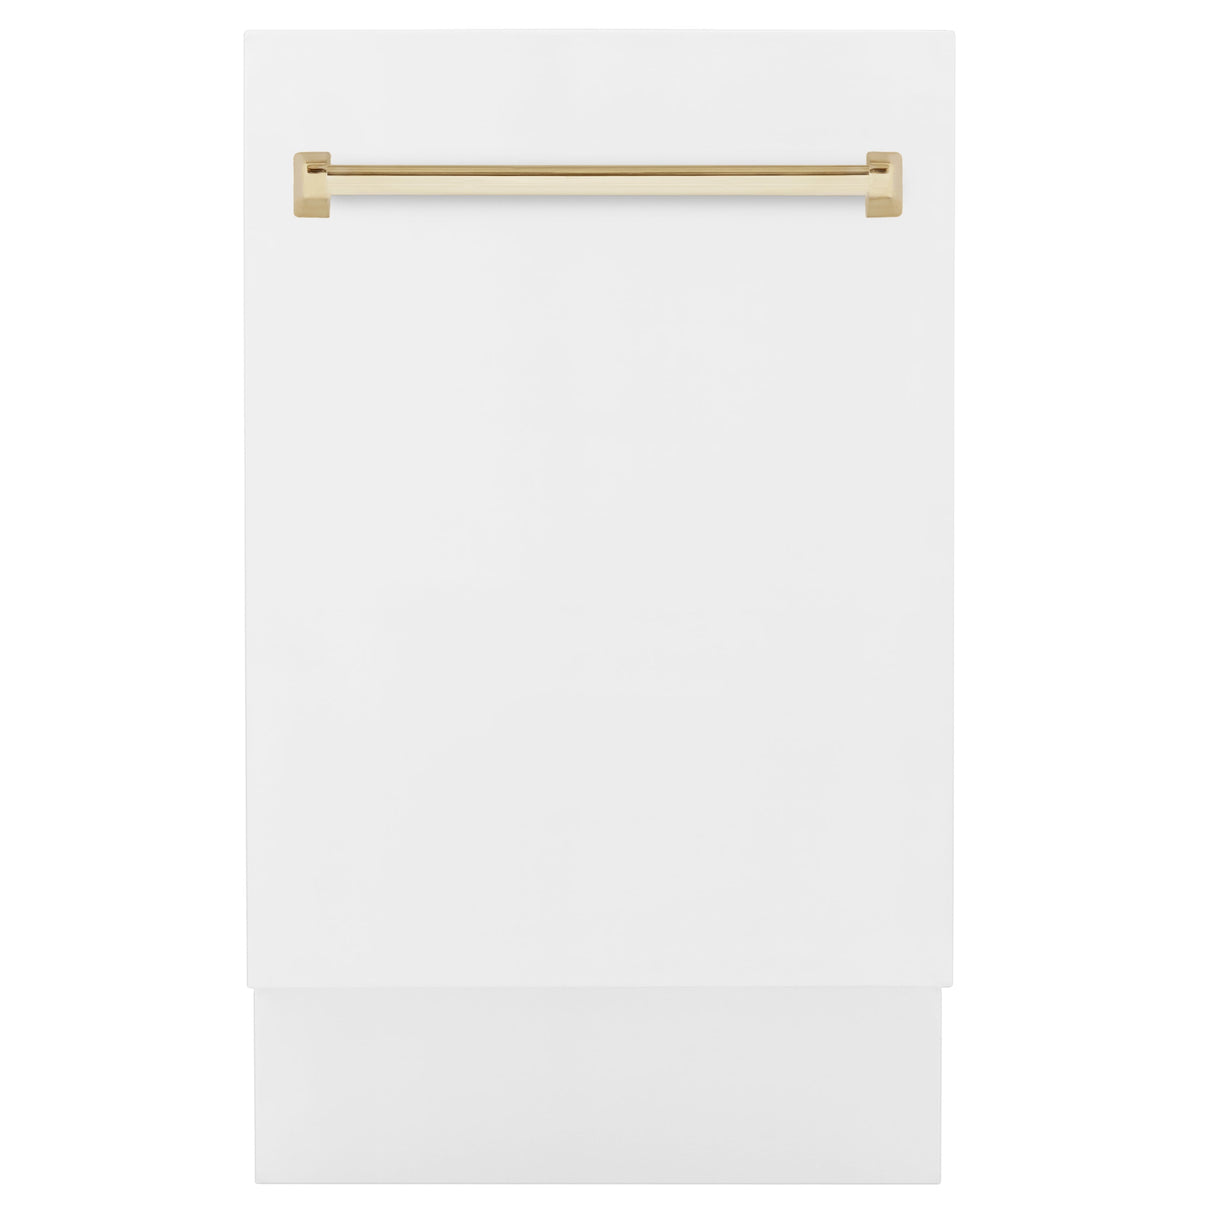 ZLINE Autograph Edition 18 in. Compact 3rd Rack Top Control Dishwasher in White Matte with Polished Gold Accent Handle, 51dBa (DWVZ-WM-18-G)-Dishwashers-DWVZ-WM-18-G ZLINE Kitchen and Bath